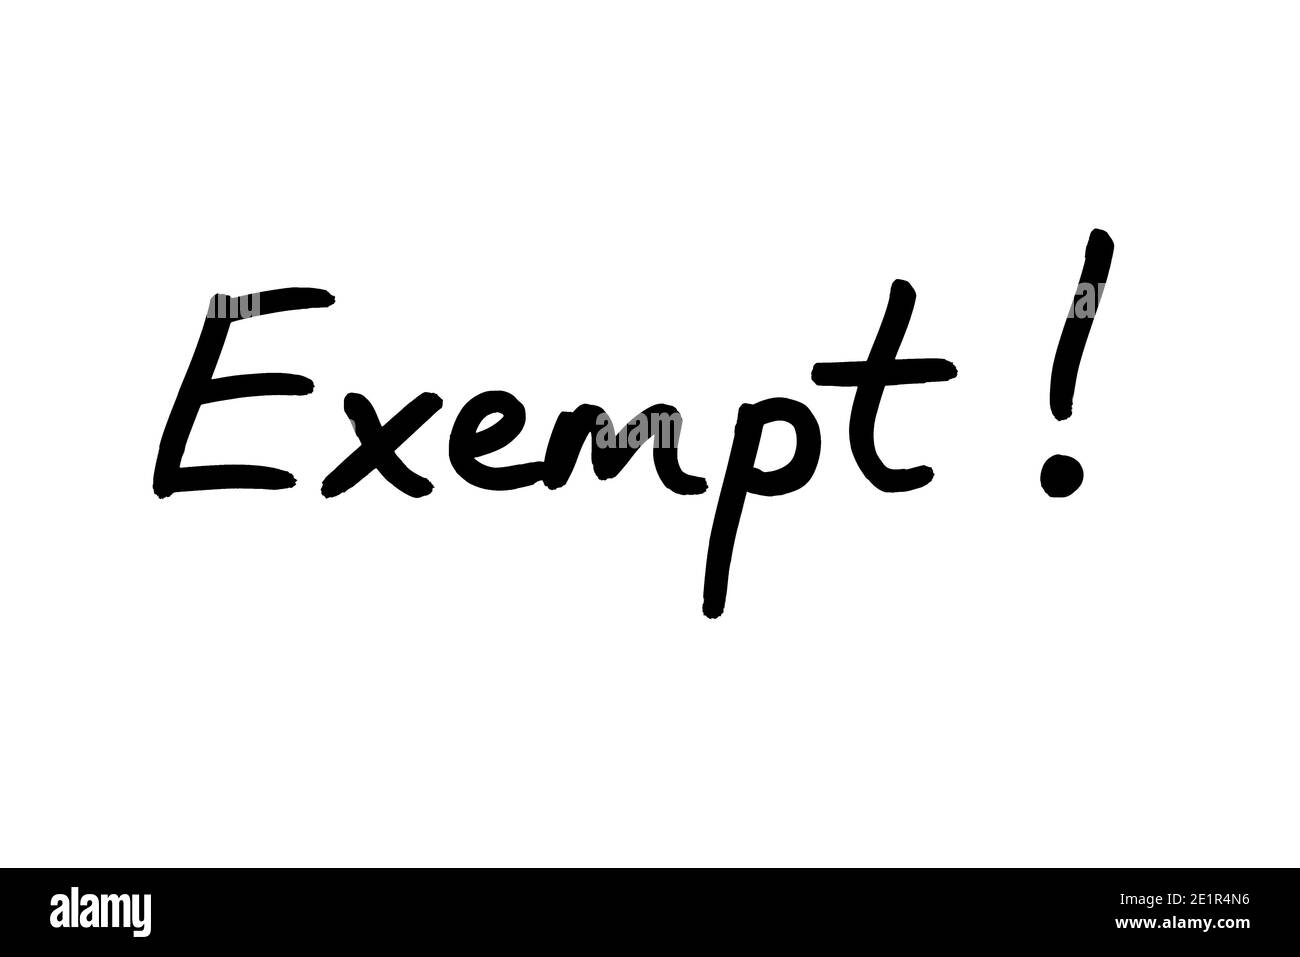 The word Exempt! handwritten on a white background. Stock Photo